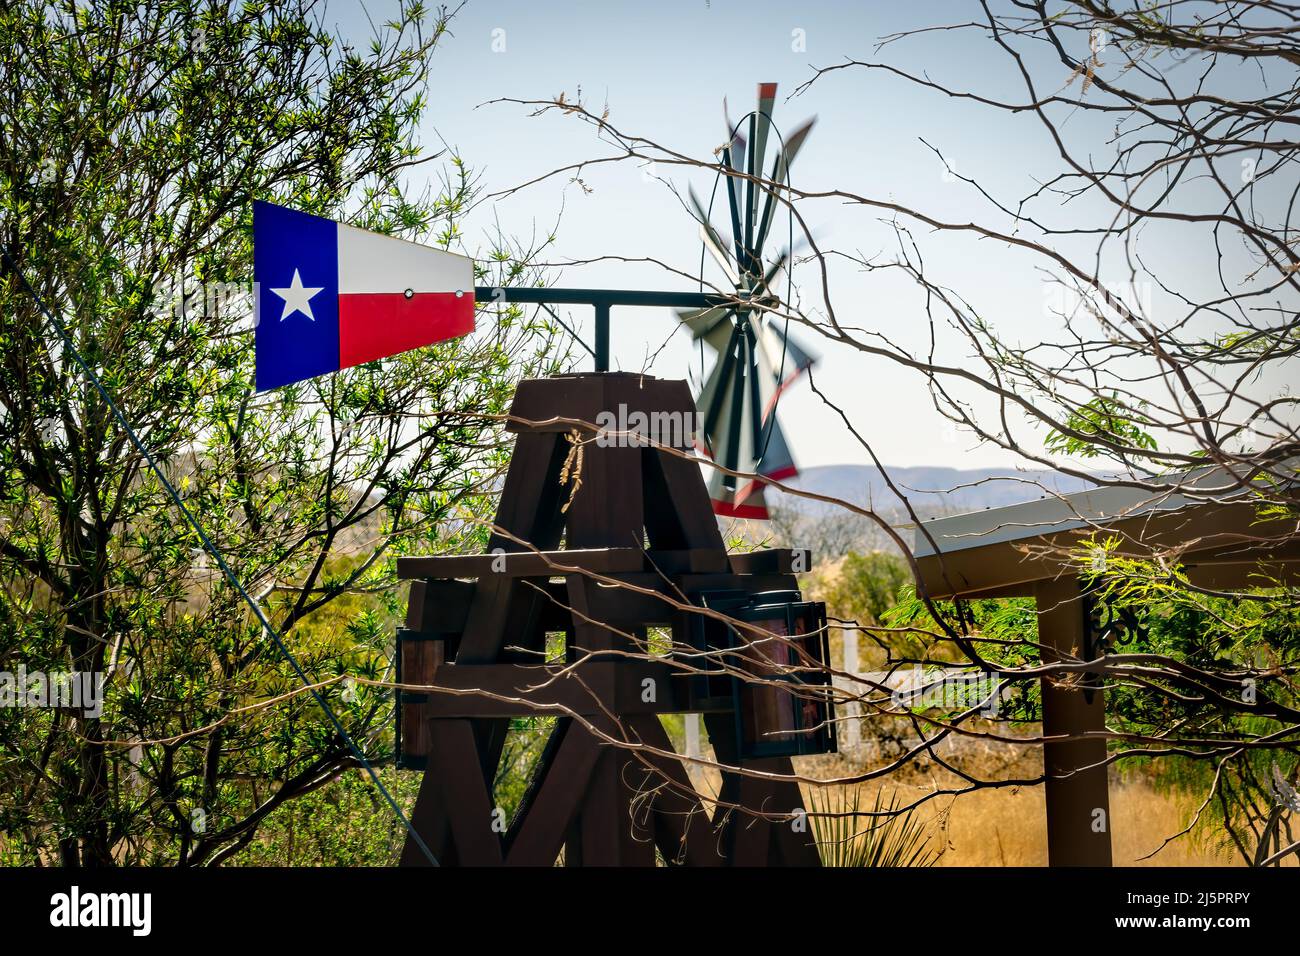 The wind spins the blades of a little windmill that sits aside a highway and painted in the Lonestar flag colors near El Paso, Texas. Stock Photo